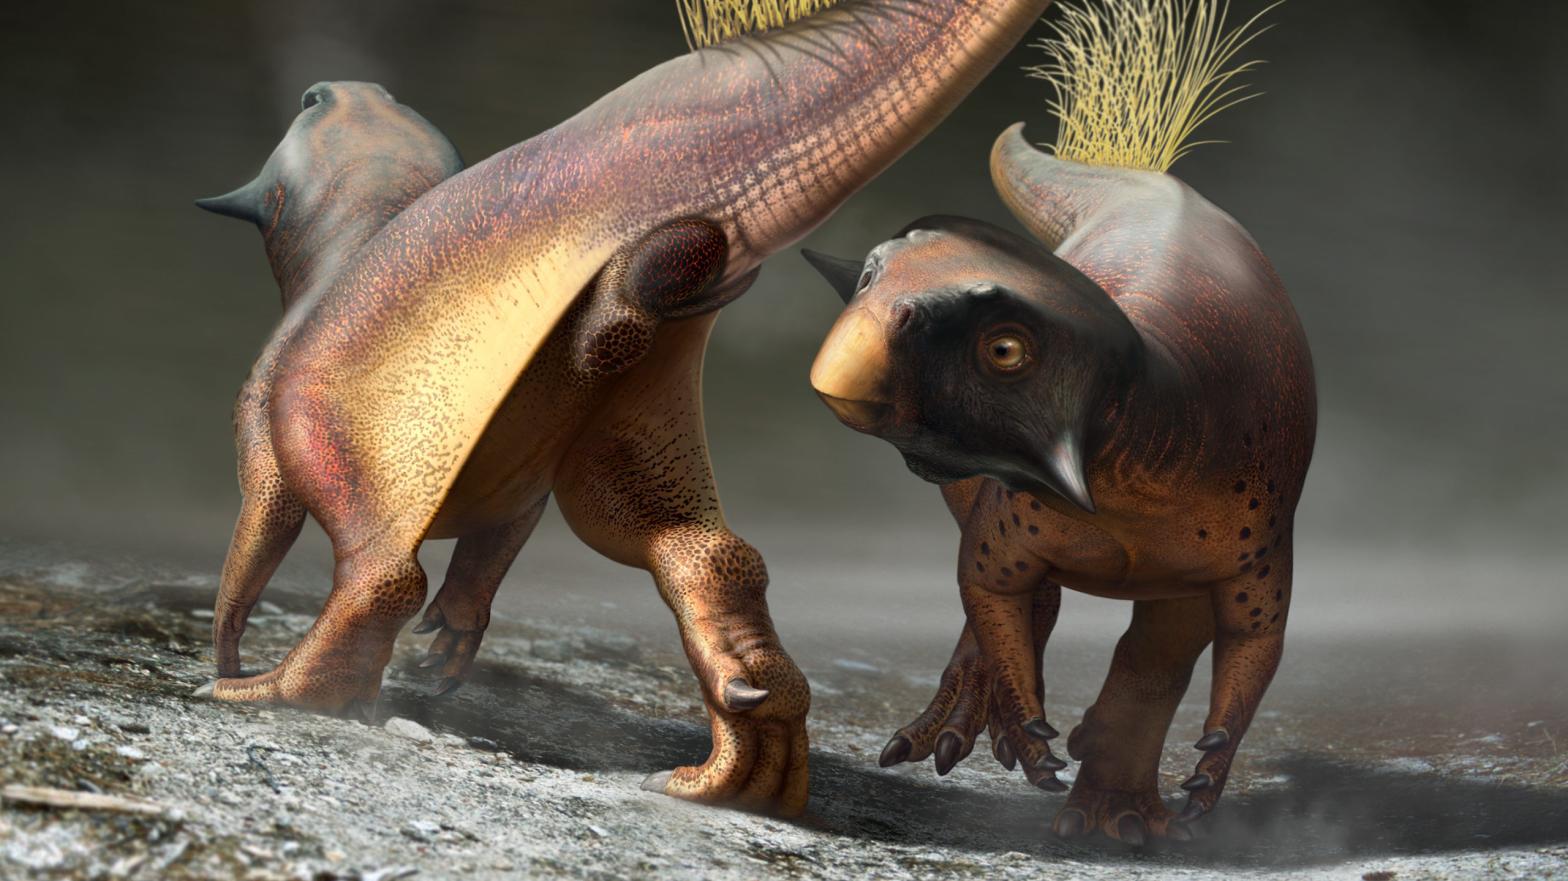 The psittacosaurus' cloacal patterns may have been used for signalling during courtship. (Illustration: Bob Nicholls/Paleocreations.com 2020)